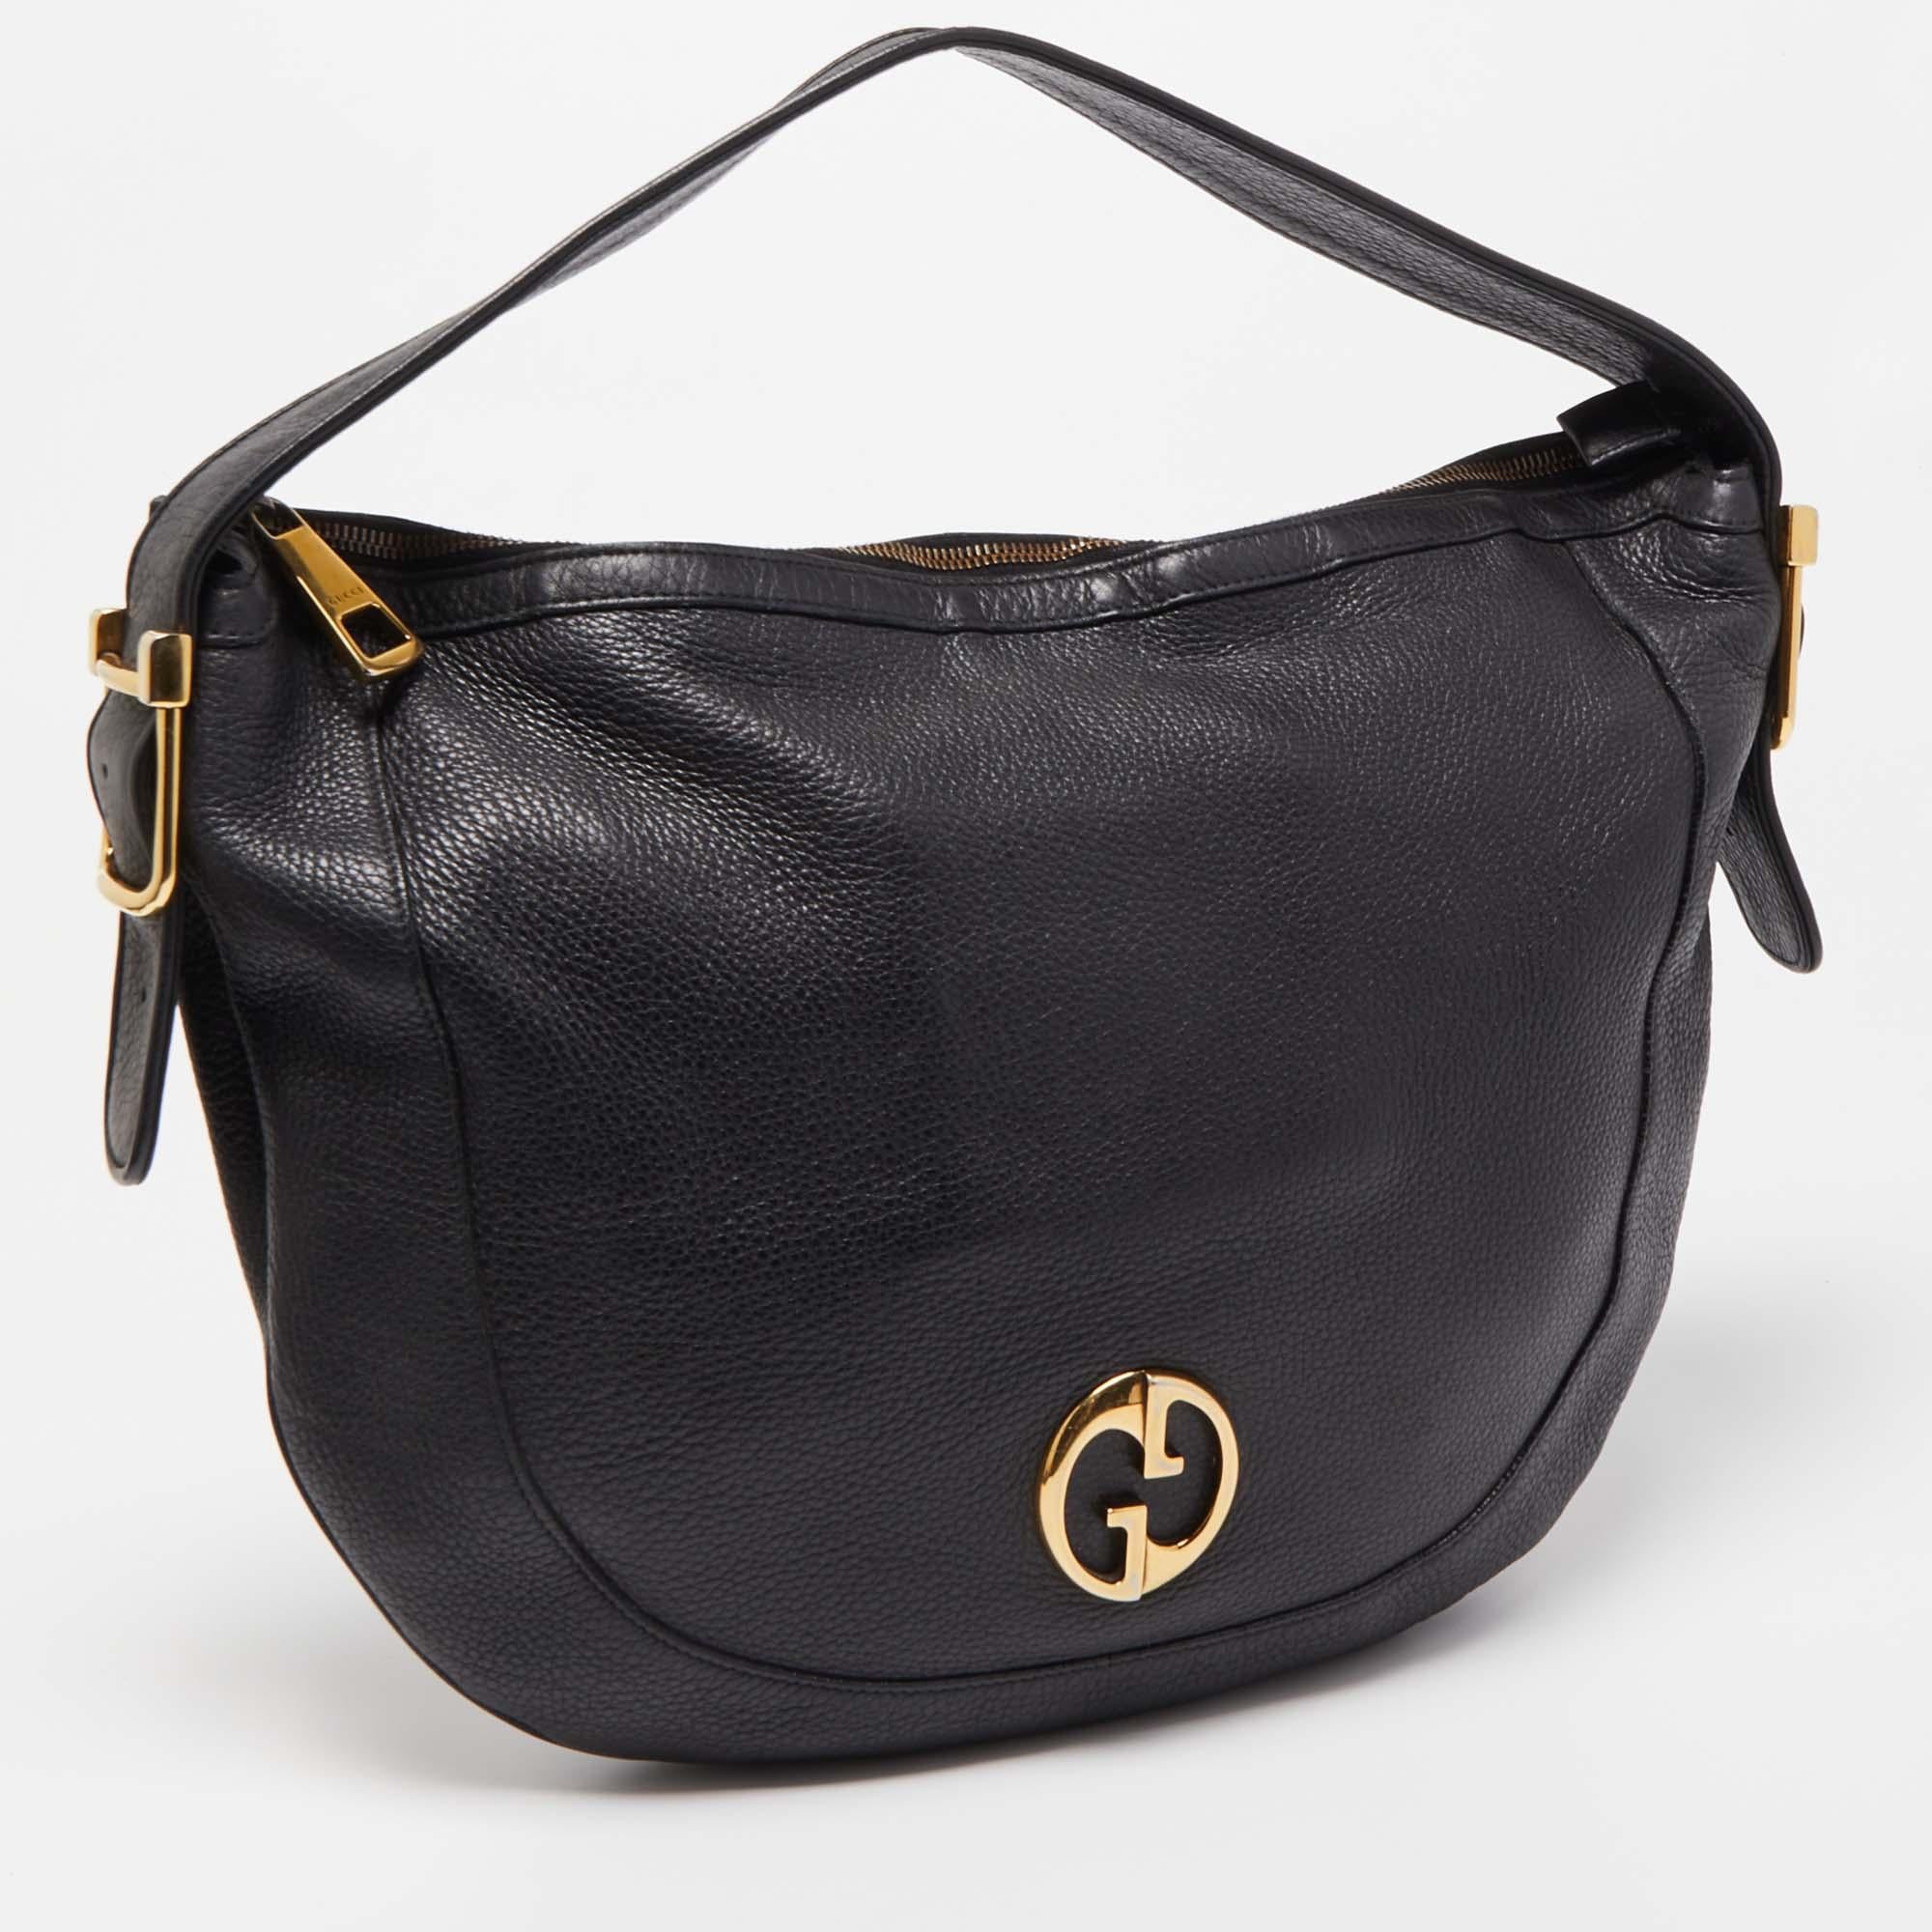 Elevate your style with this Gucci women's bag. Merging form and function, this exquisite accessory epitomizes sophistication, ensuring you stand out with elegance and practicality by your side

